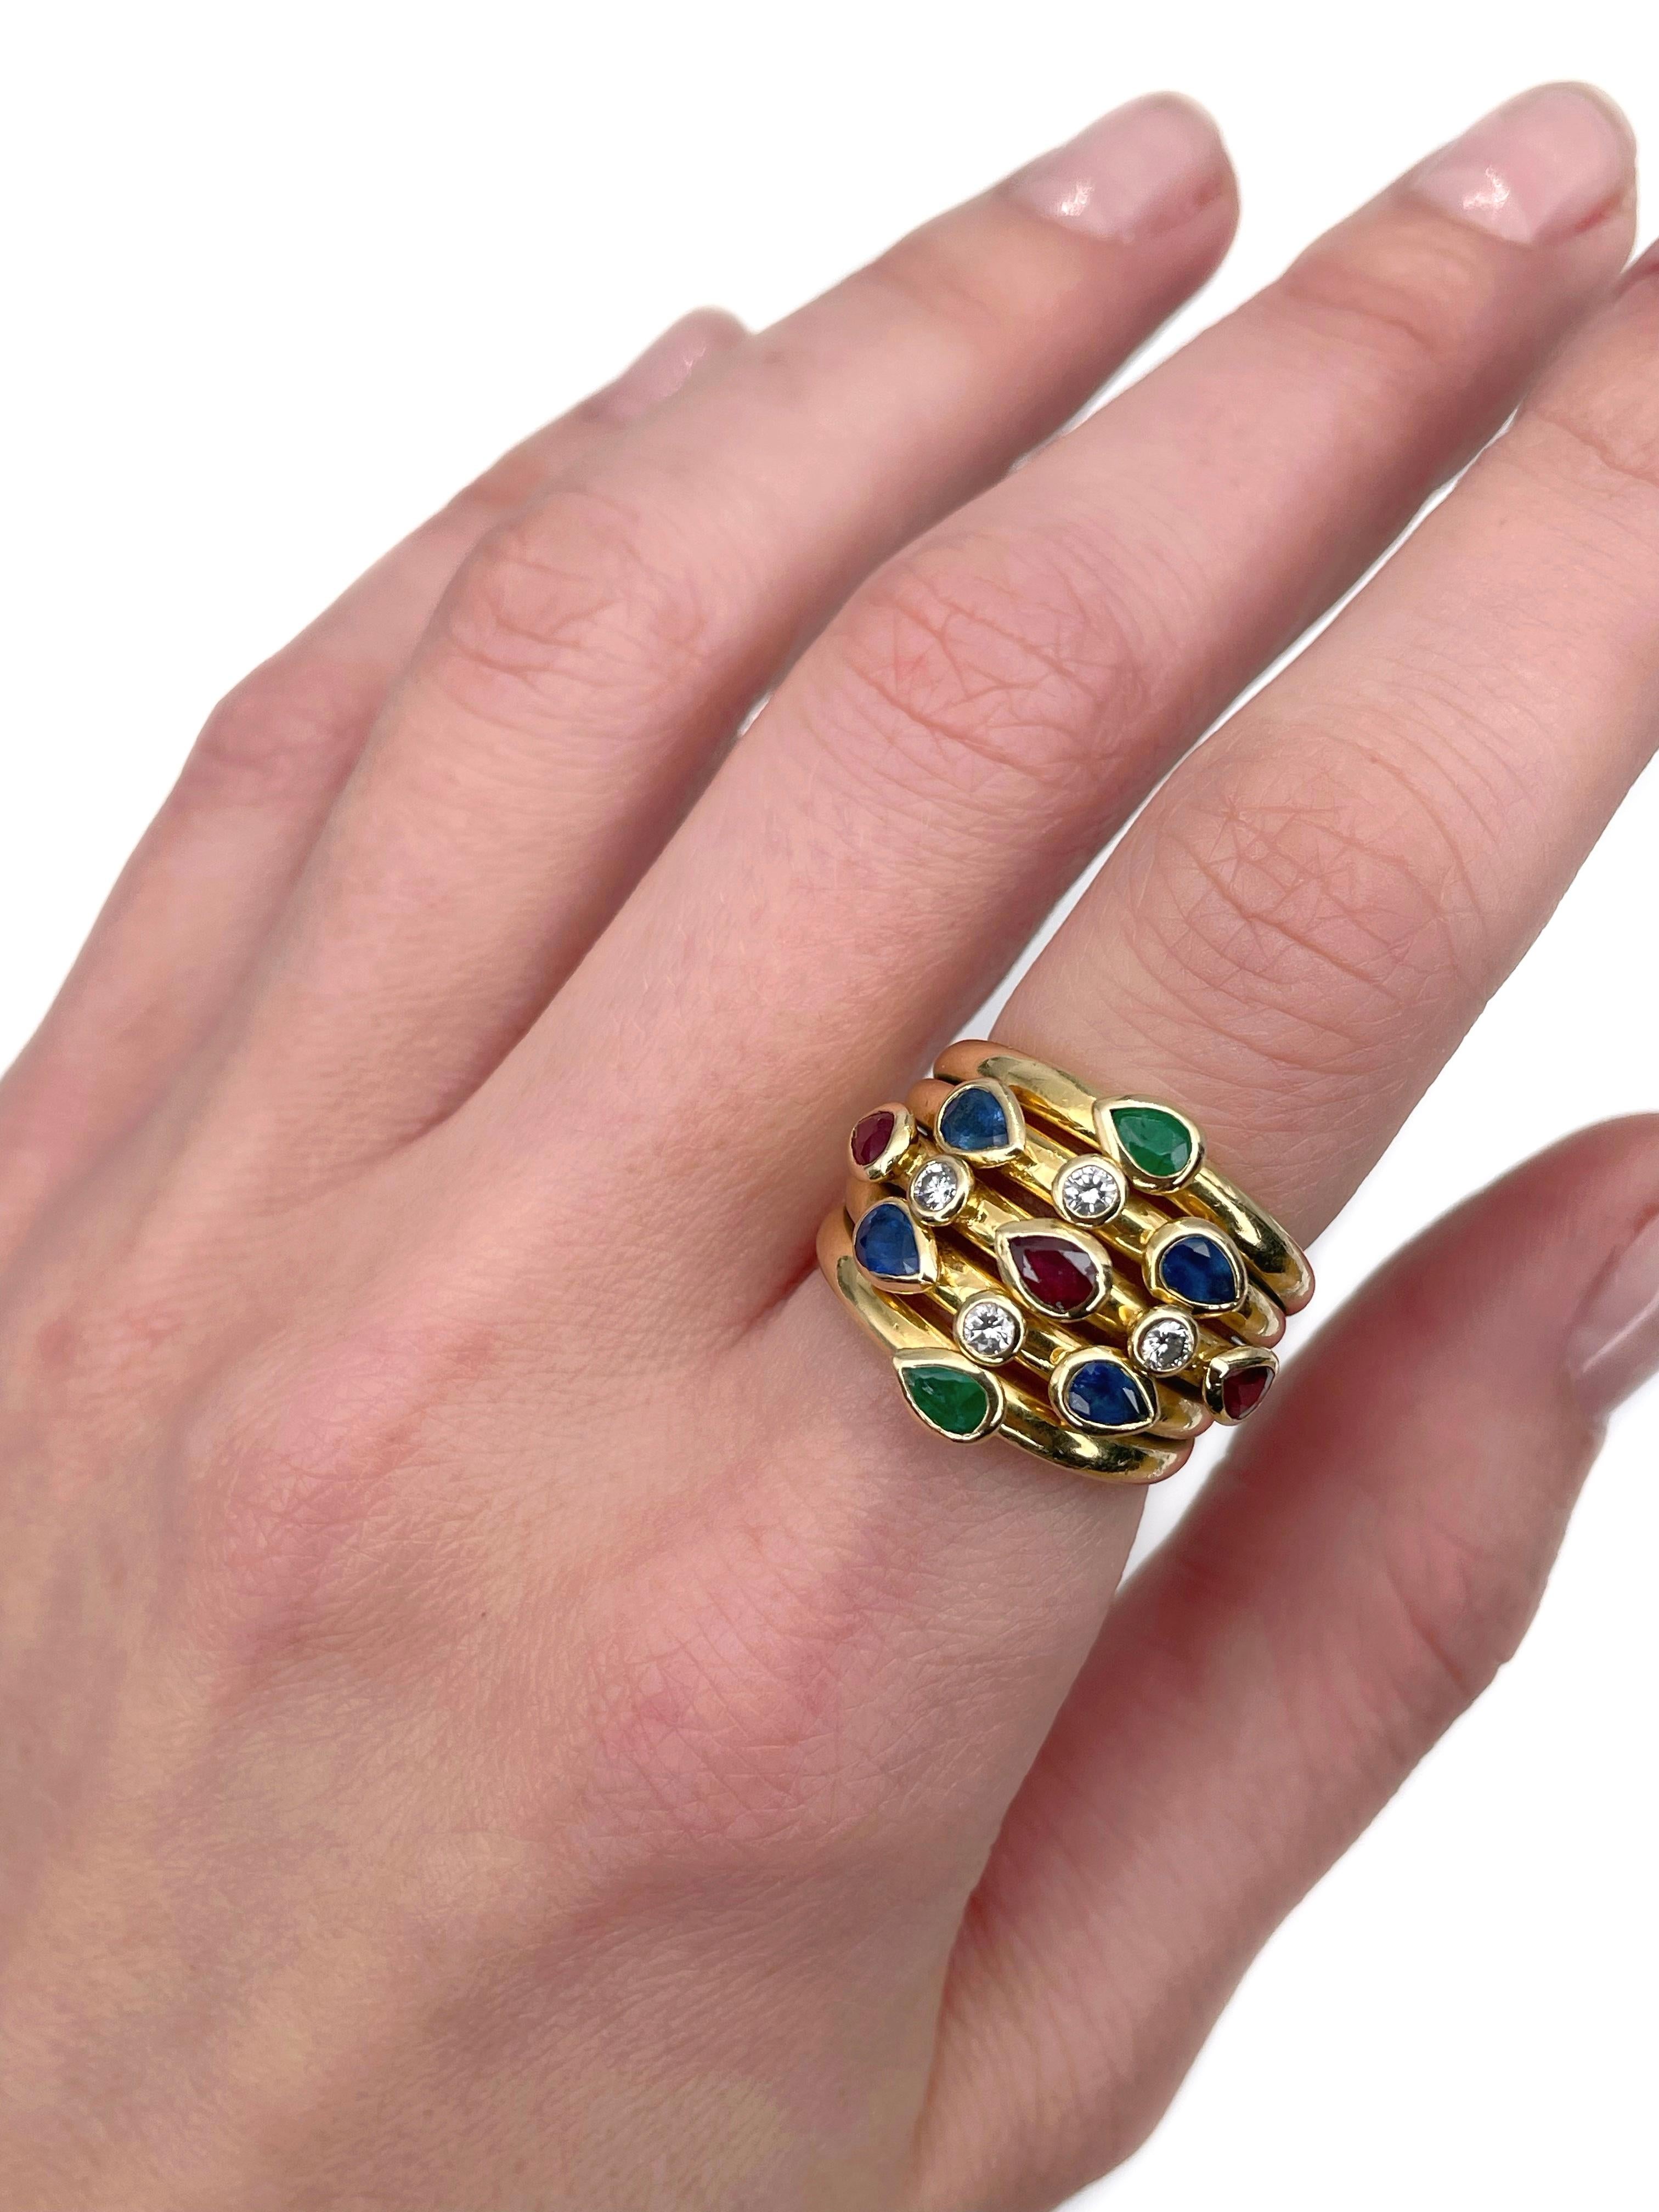 This is an amazing multi-gem five band ring designed by Adler for “Serail�” collection. Circa 1990. 

It is crafted in 18K yellow gold. The piece features:
- 3 rubies (pear cut, TW 0.50ct, slpR 7/4, VS-SI)
- 4 sapphires (pear cut, TW 0.60ct, vB 5/3,